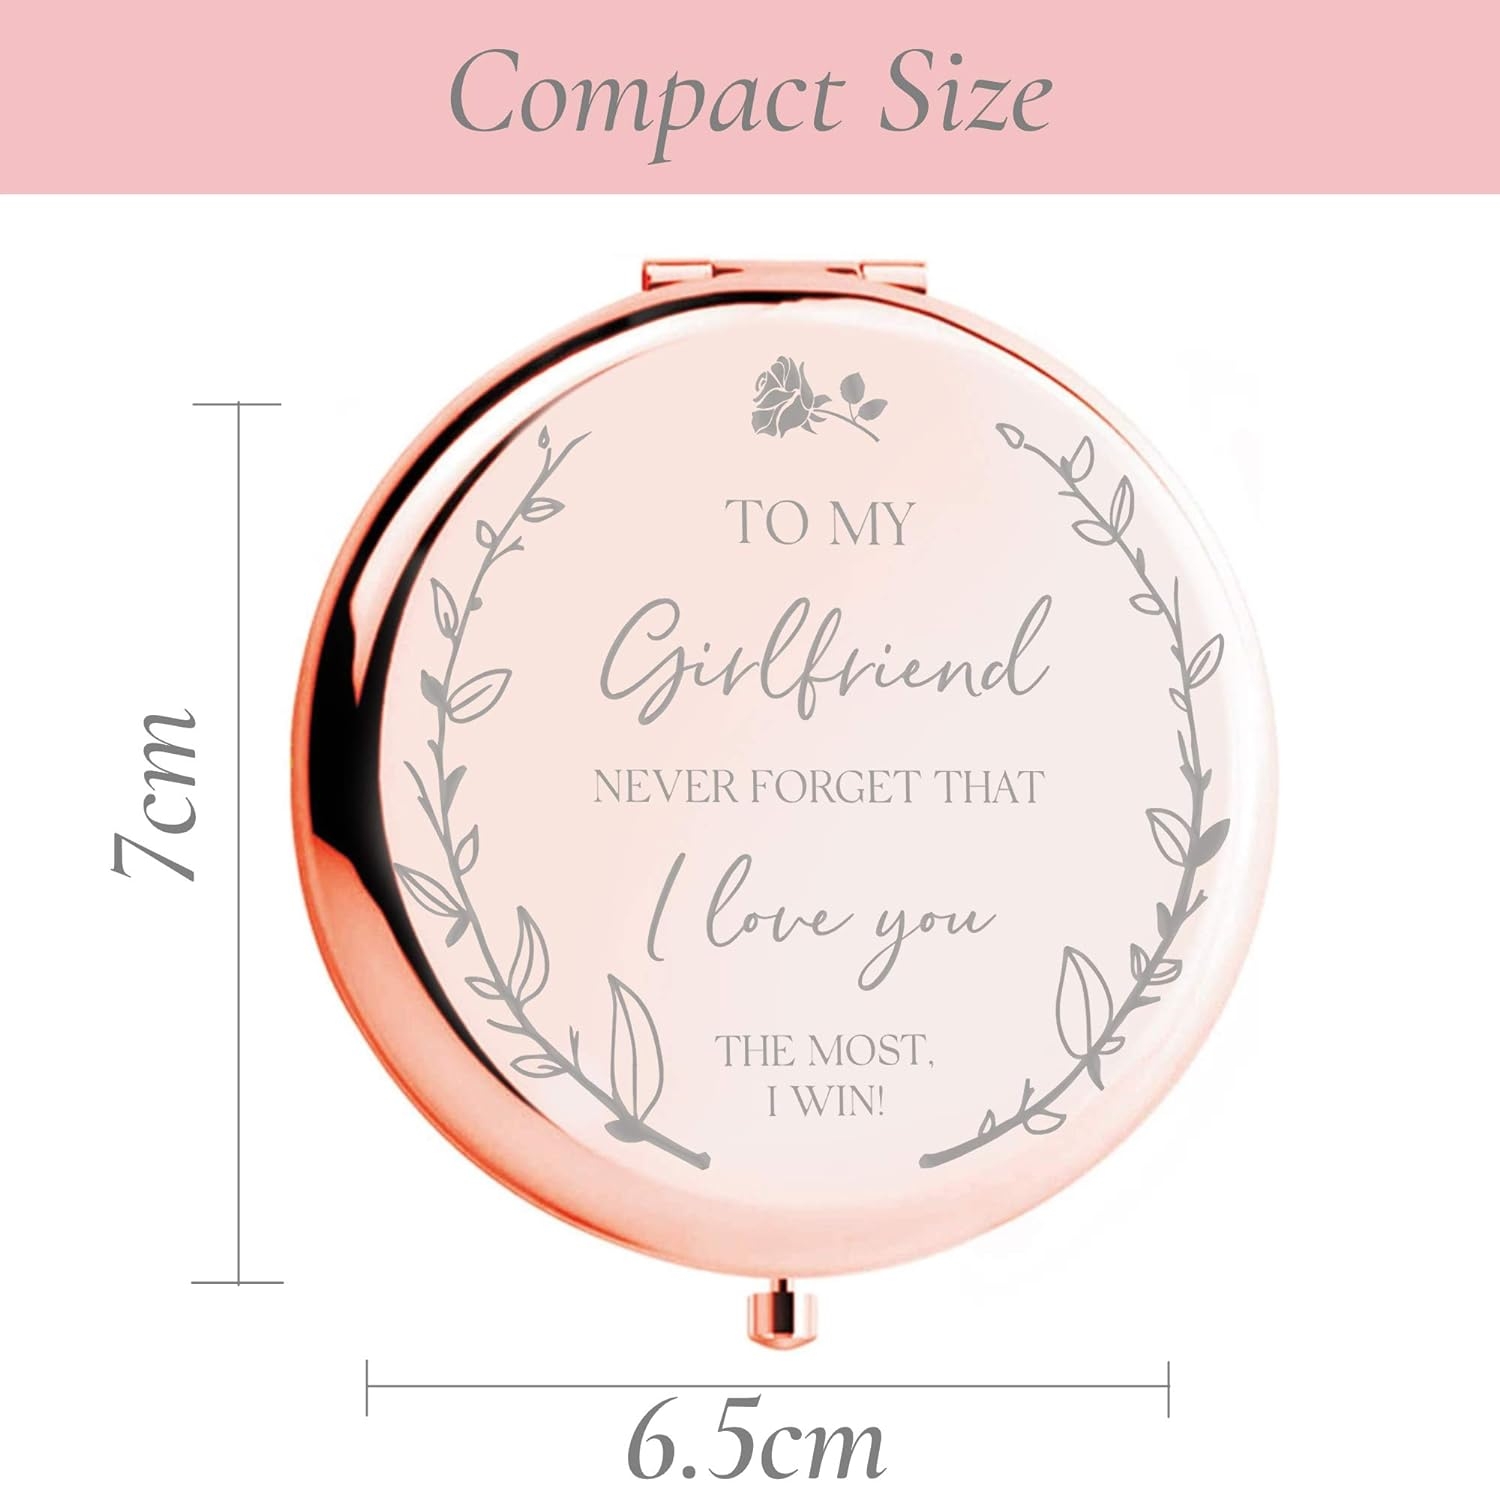 Cute Birthday Gifts for Girlfriend I 'to My Girlfriend' Compact Mirror I Cute Girlfriend Gifts to say I Love You I Girlfriend Gift Ideas I One Year Anniversary Gi fts for Girlfriend